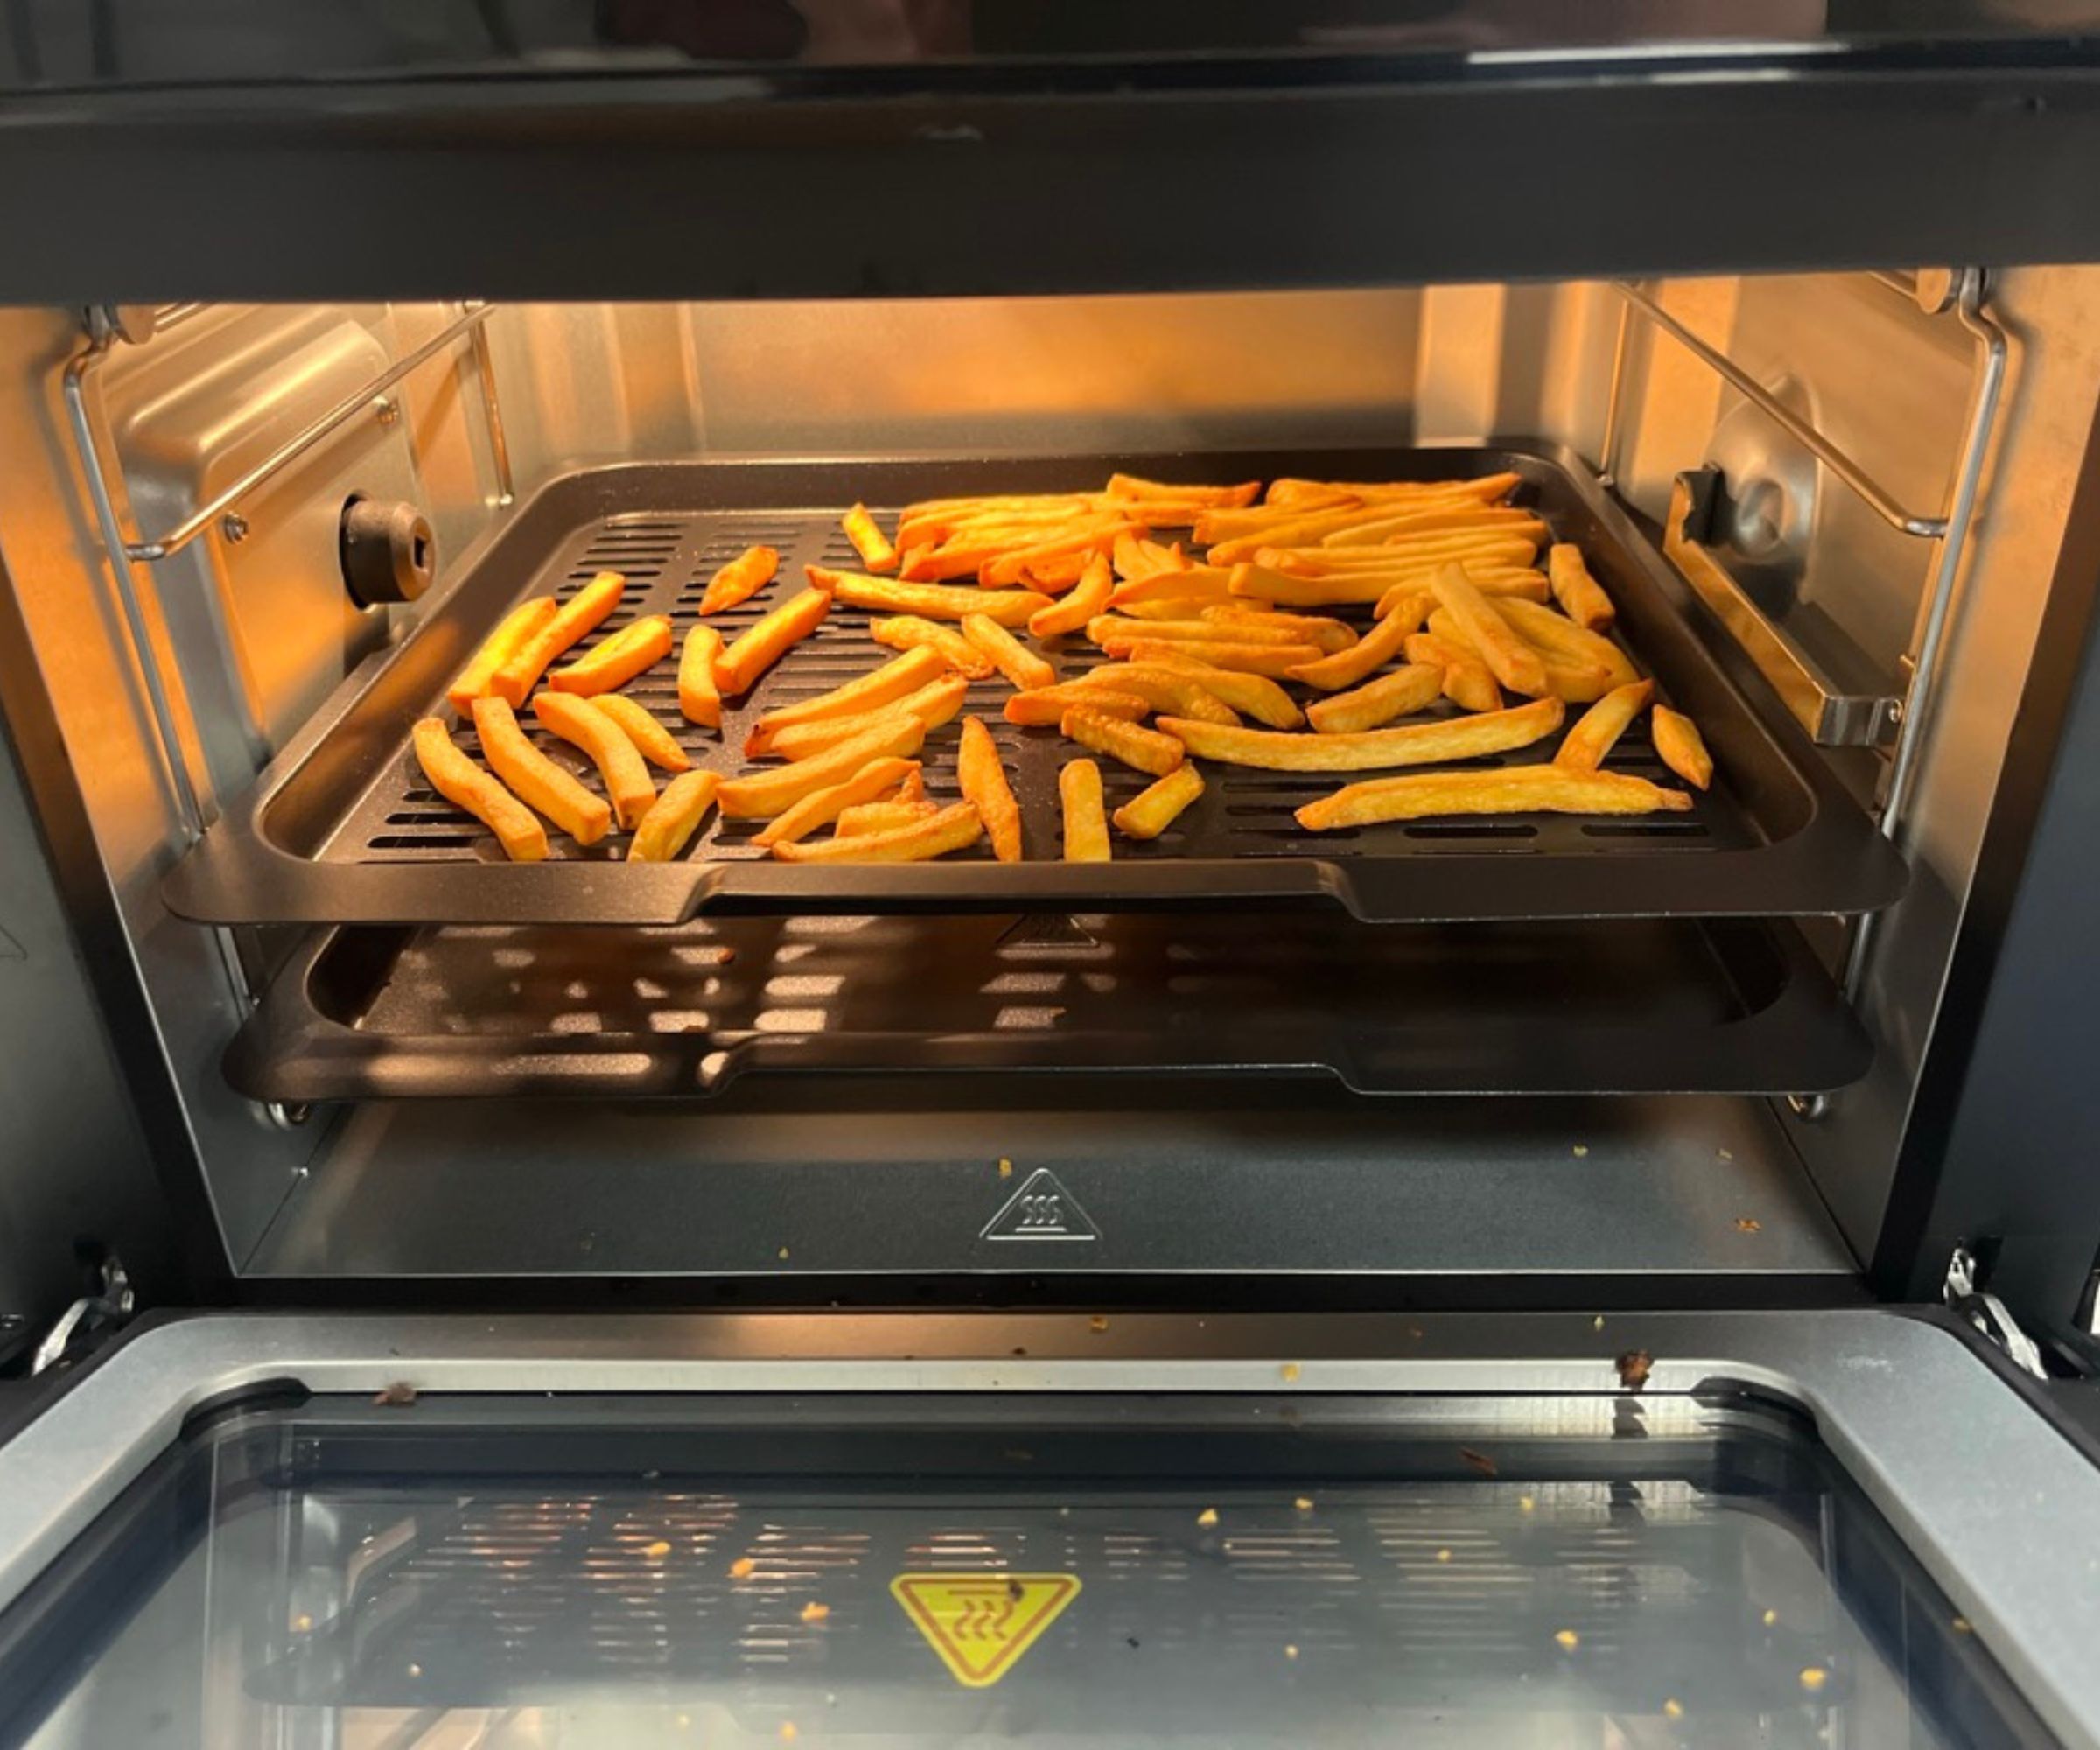 French fries in the Proscenic T31 Air Fryer.